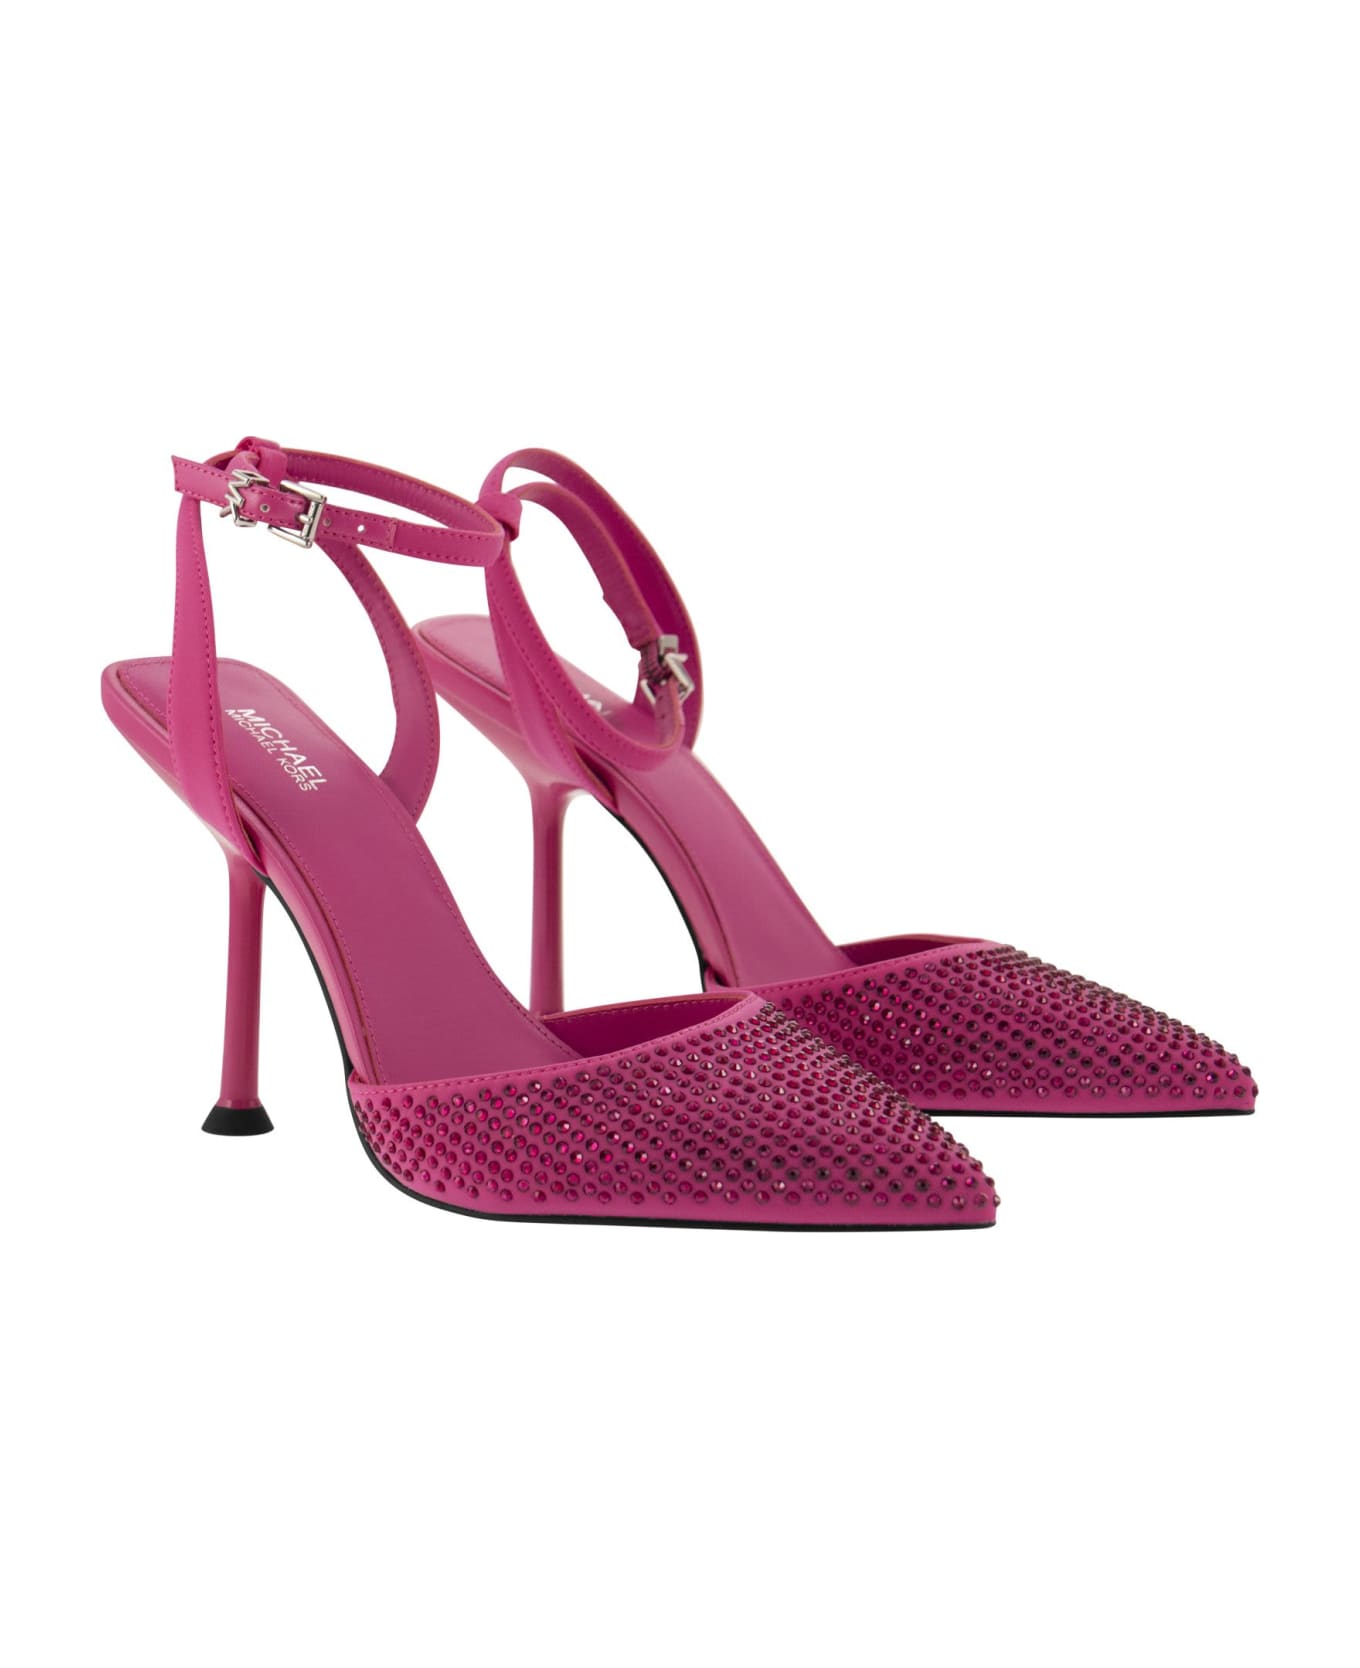 MICHAEL Michael Kors Imani Pump Pumps In Fabric With Crystals - Cerise